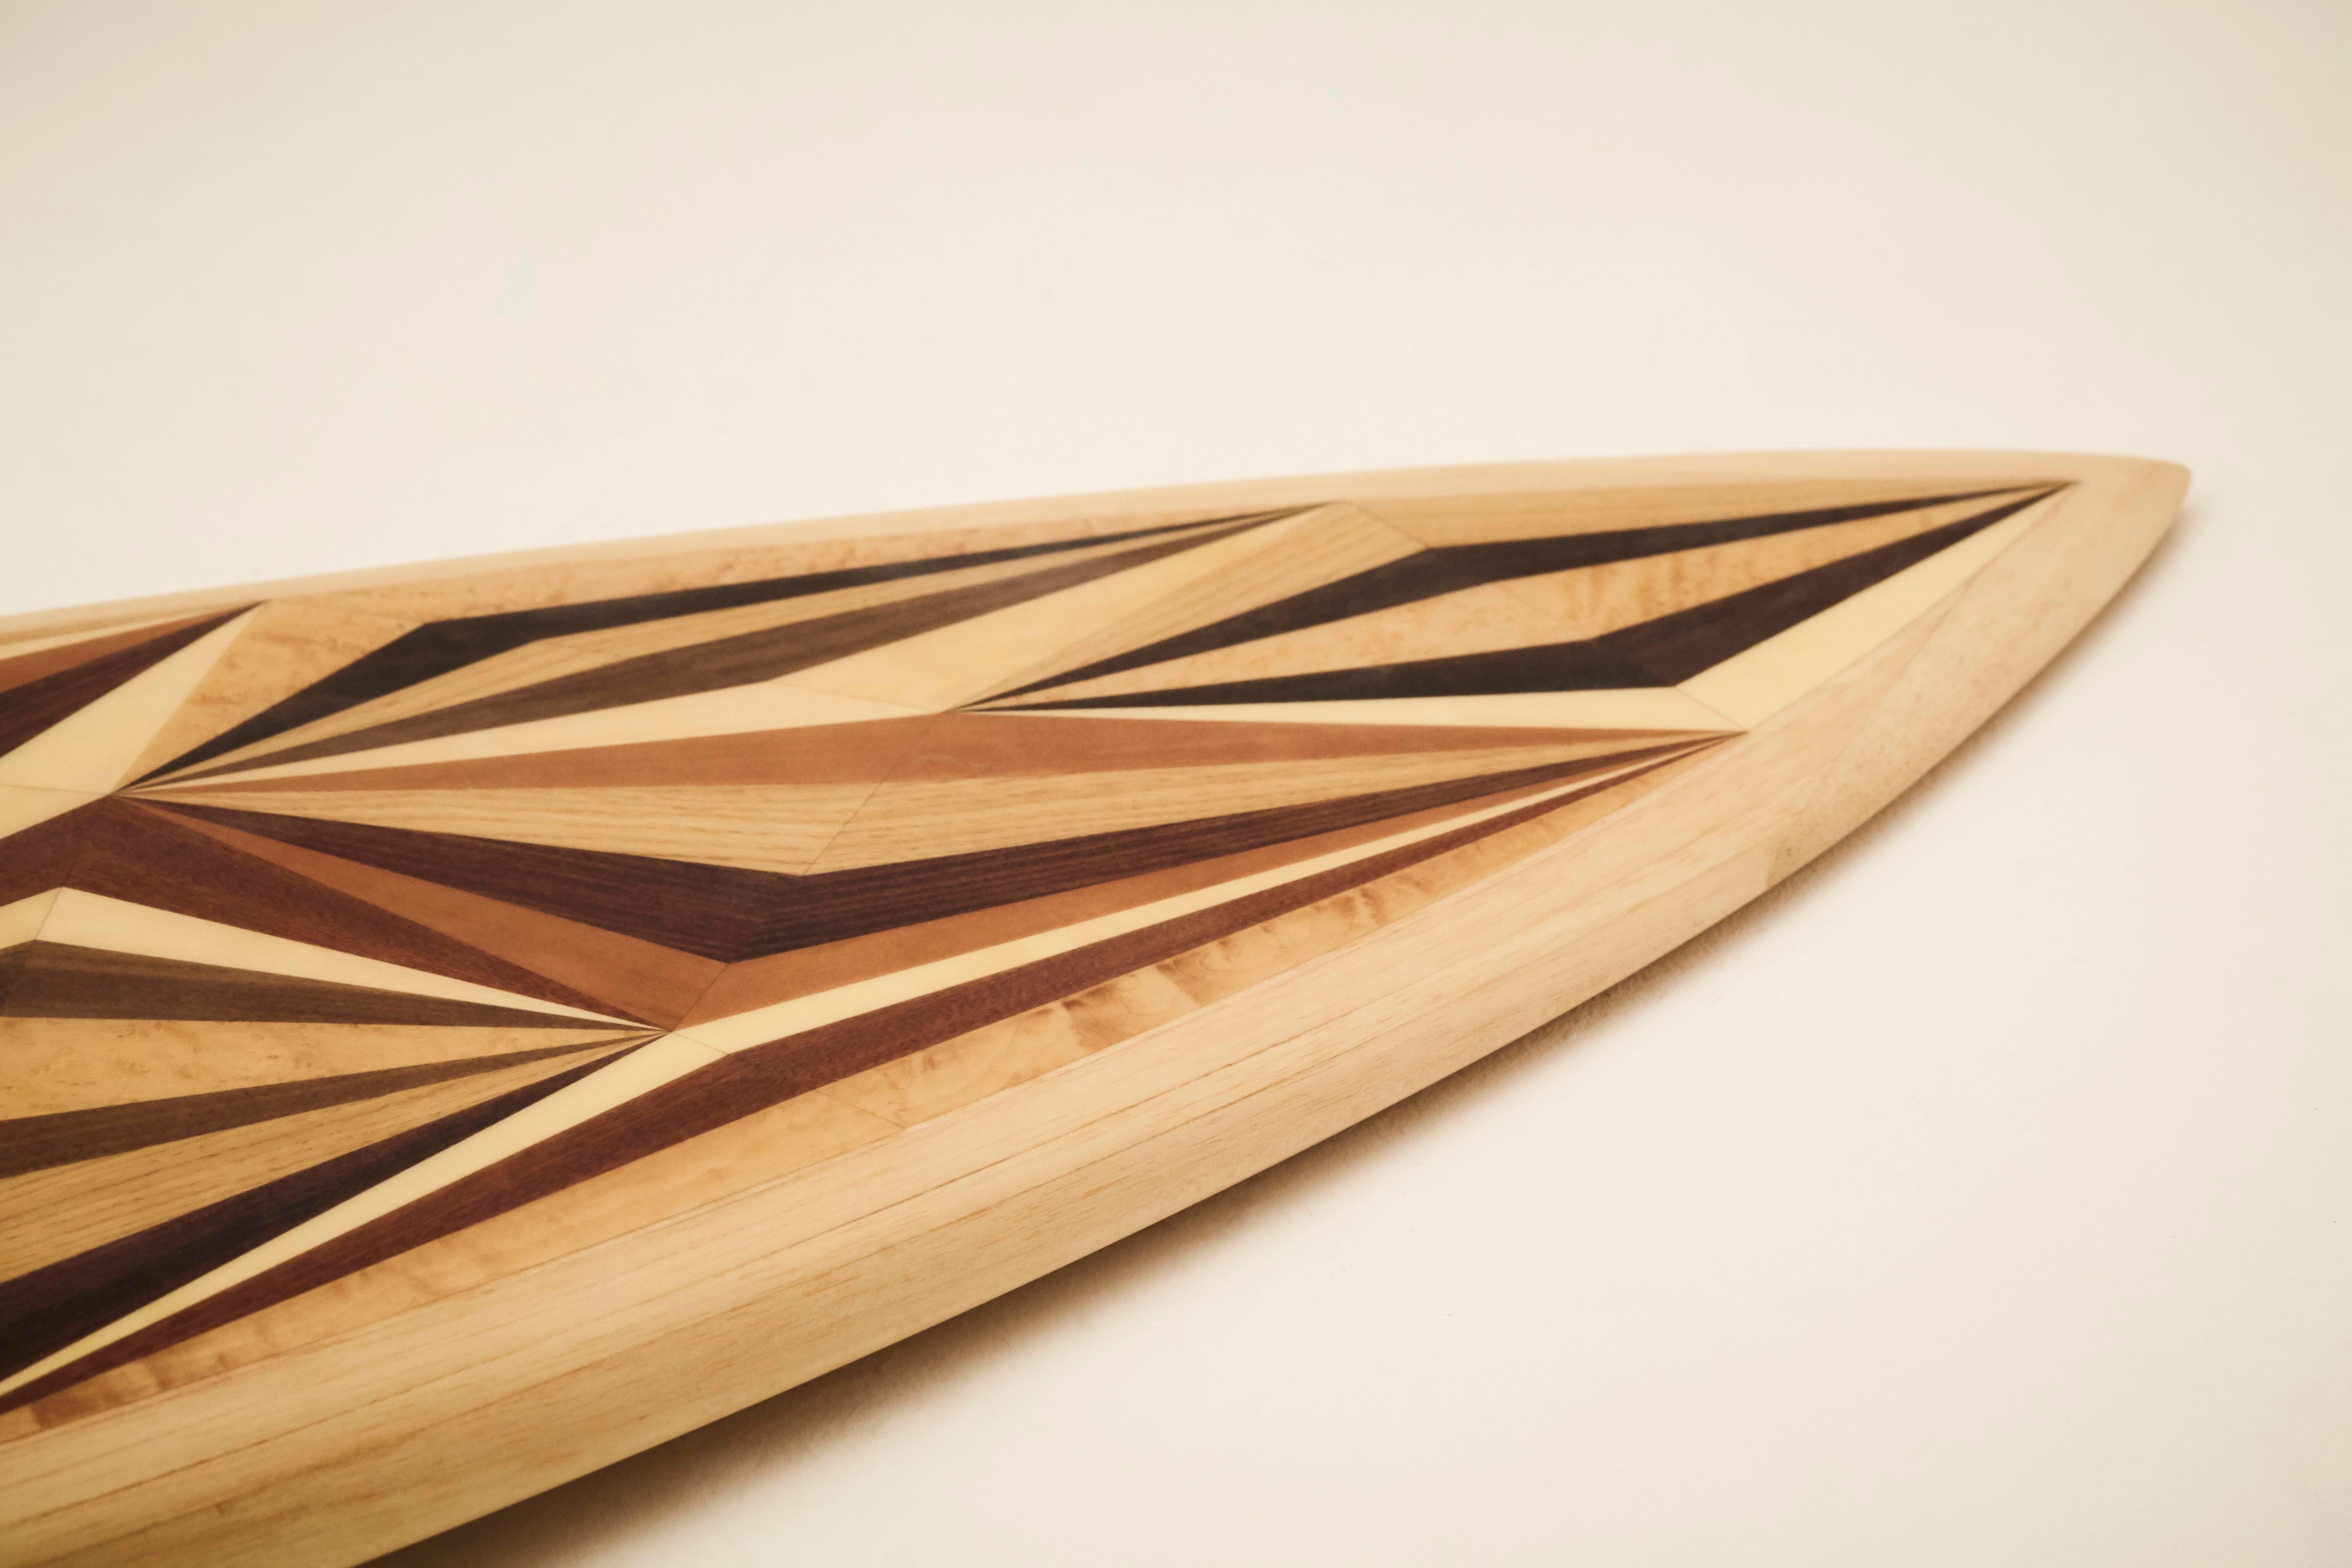 This is a unique custom surfboard featuring a marquetry deck, designed and hand-crafted by the w o o d p o p studio which specialises in marquetry and inlay work. 

The studio prides itself on constantly challenging the limits of where and how